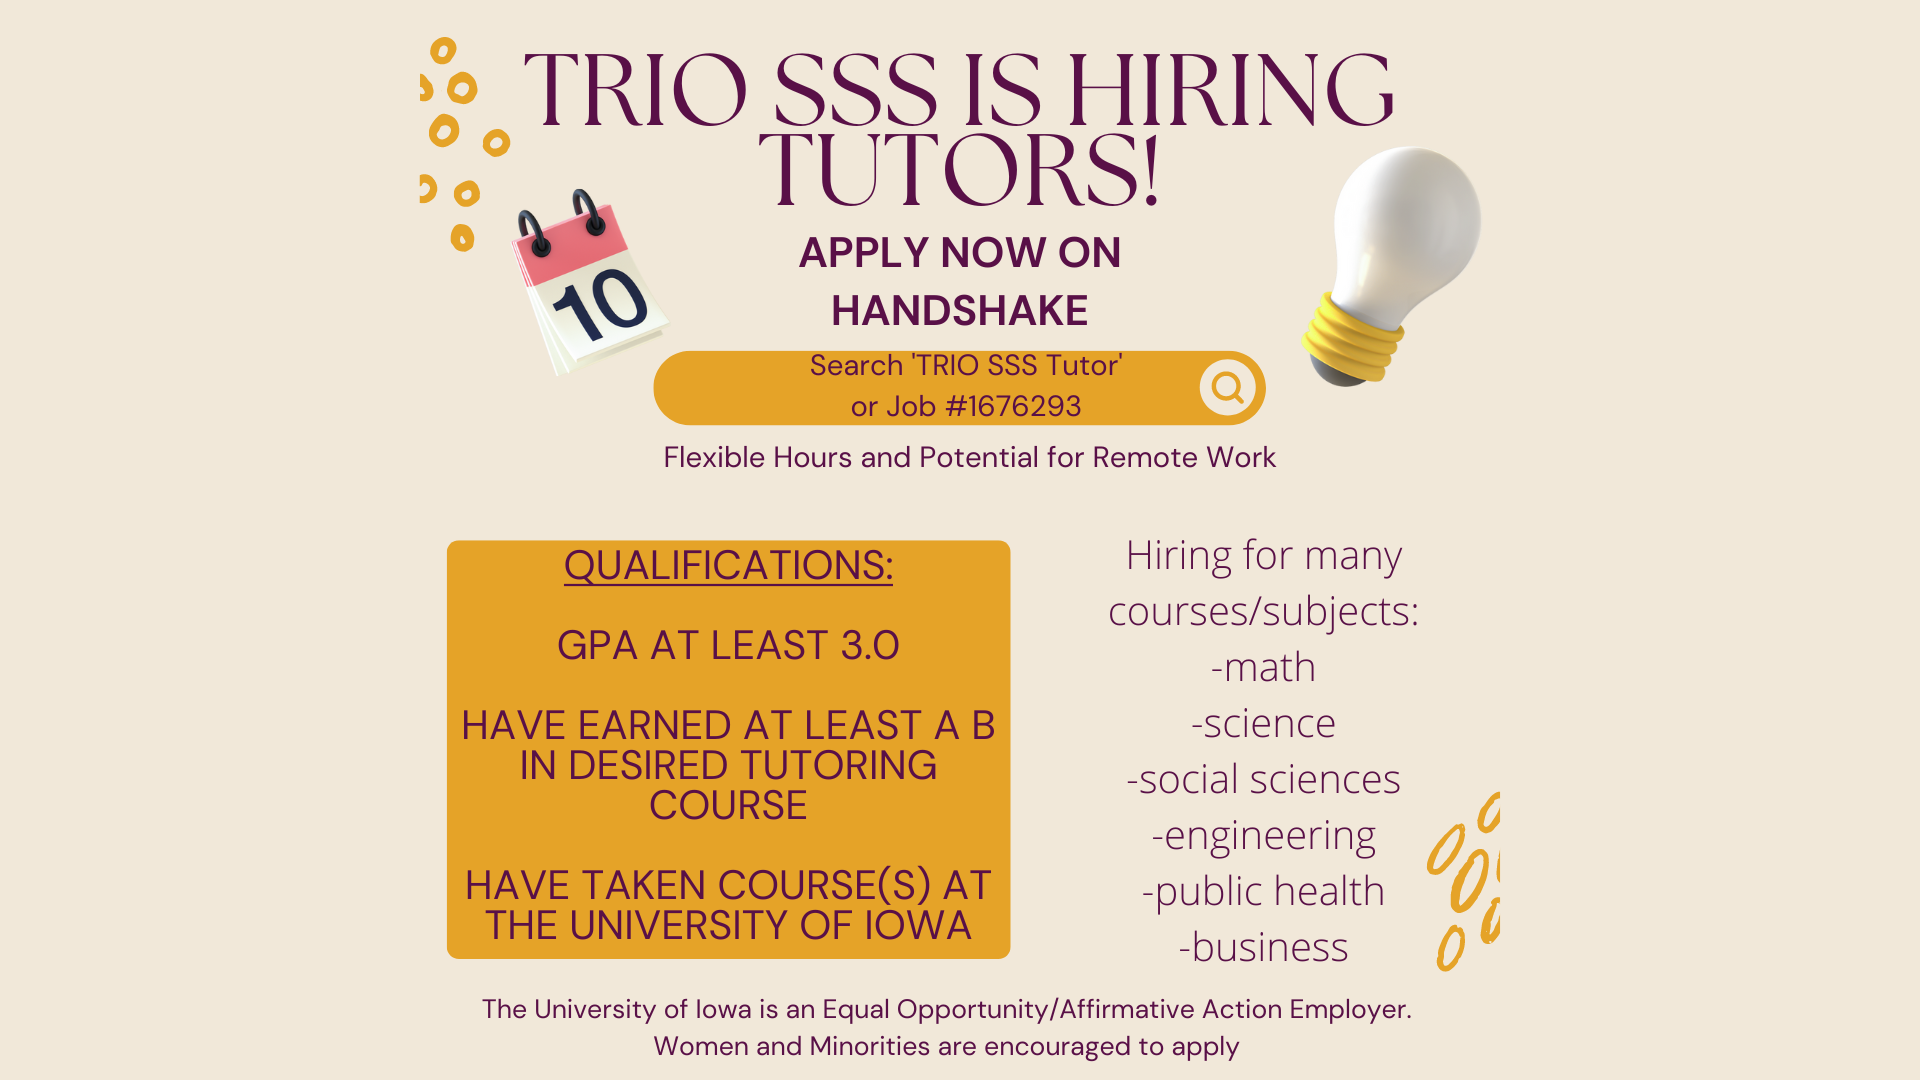 Trio SSS is hiring tutors. Qualifications: Minimum 3.0 gpa, earned at least a B in desired tutoring course, and taken courses at the University of Iowa